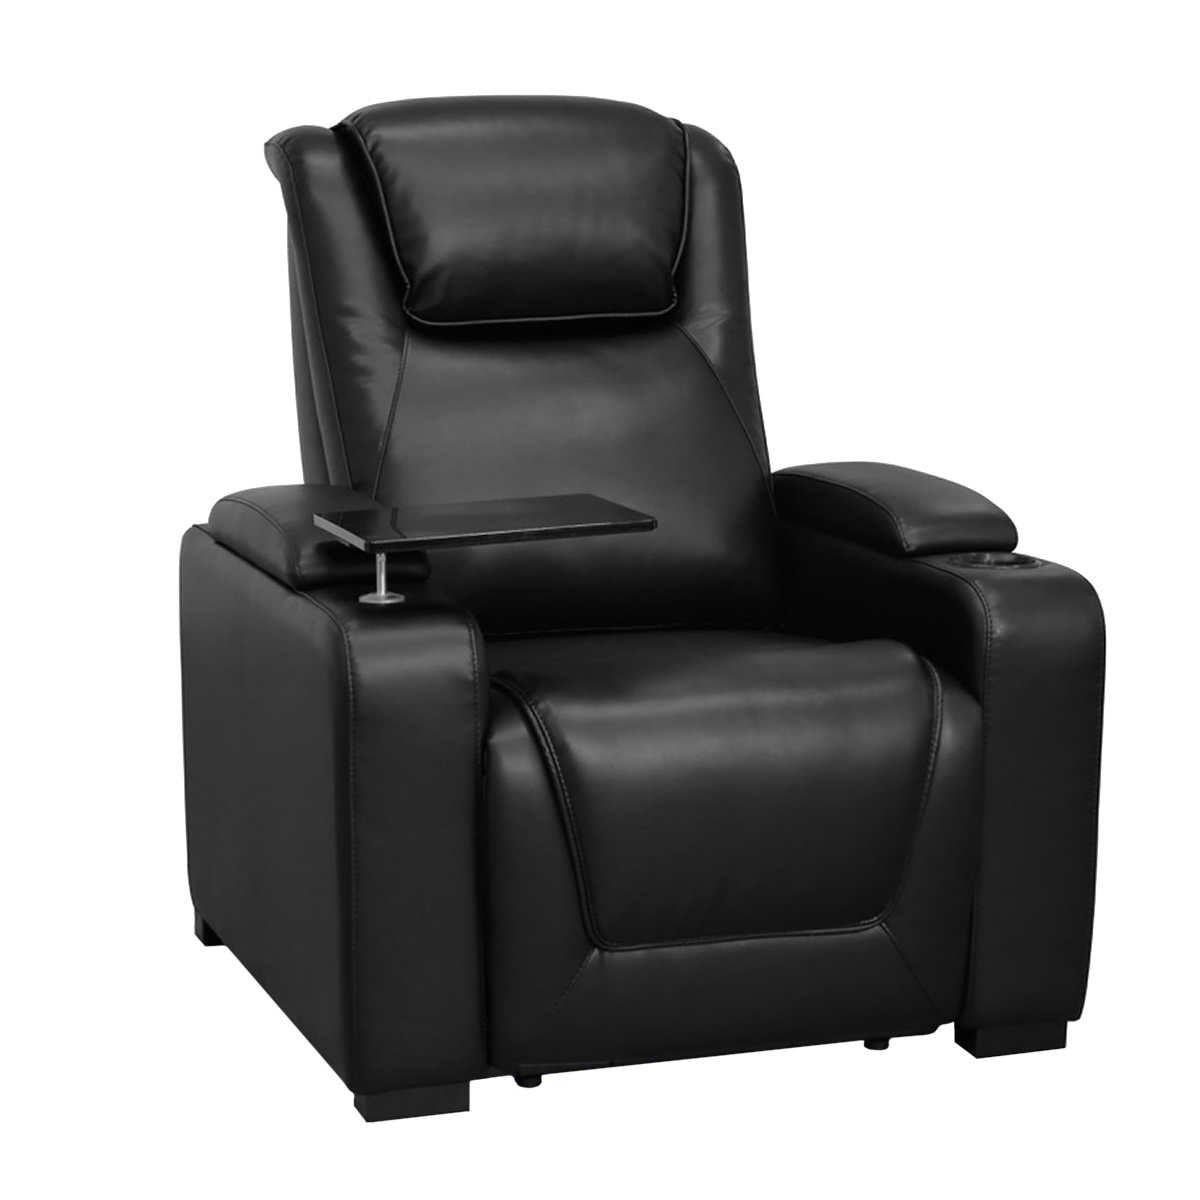 Kingsdown Top Grain Leather Home Theatre Power Recliner, has small rip in the back